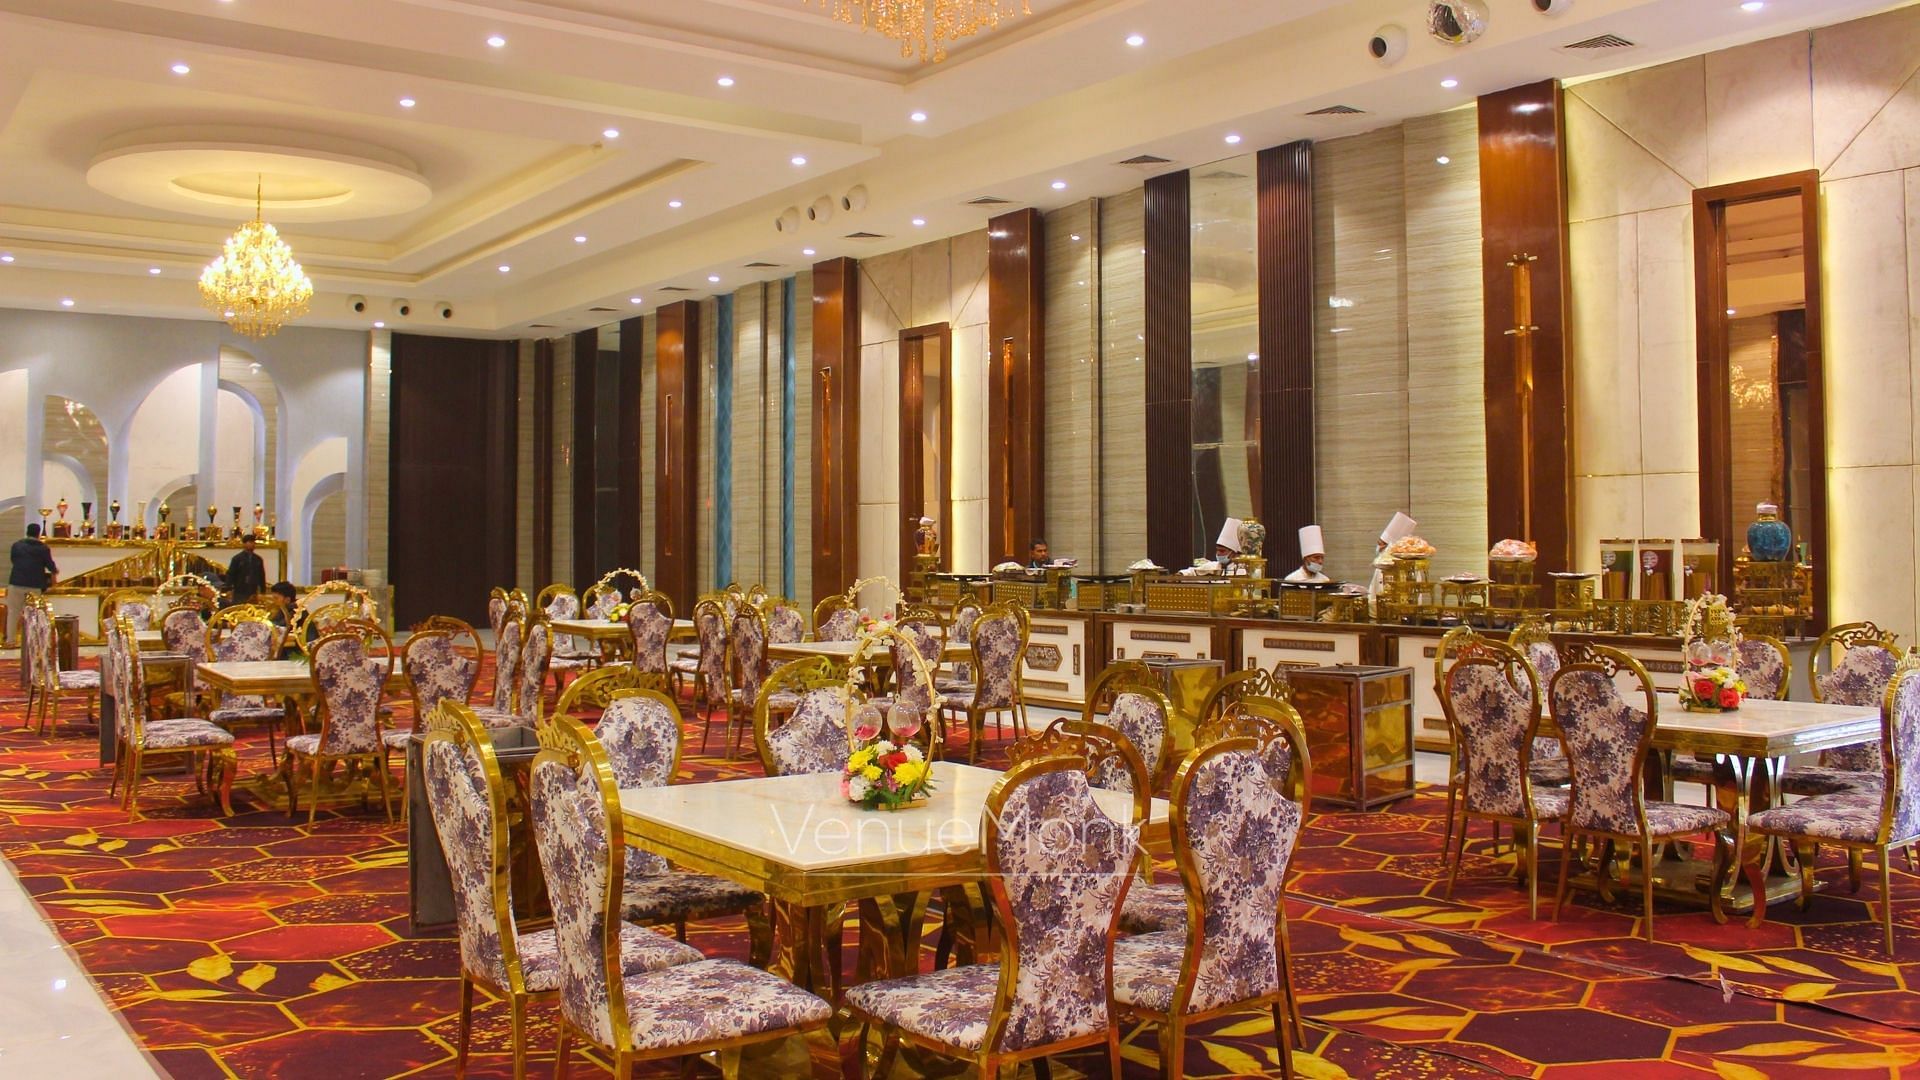 THE GRAND AMBIENCE BY BABA in Sector 21, Faridabad